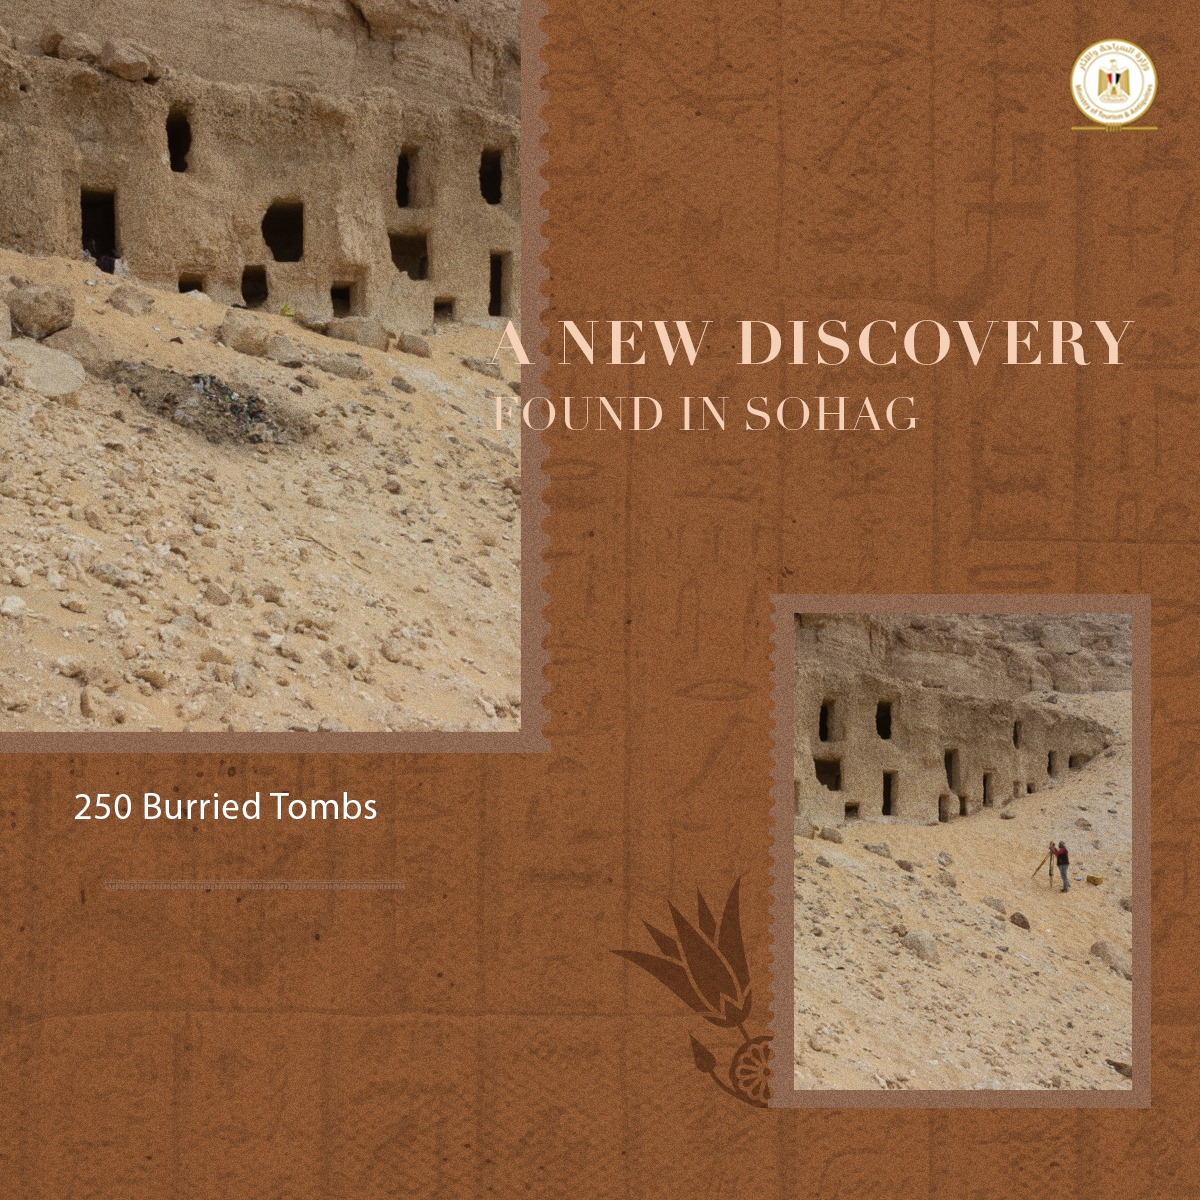 Discovery of the year: Egyptian archaeologists have discovered more than 300 tombs